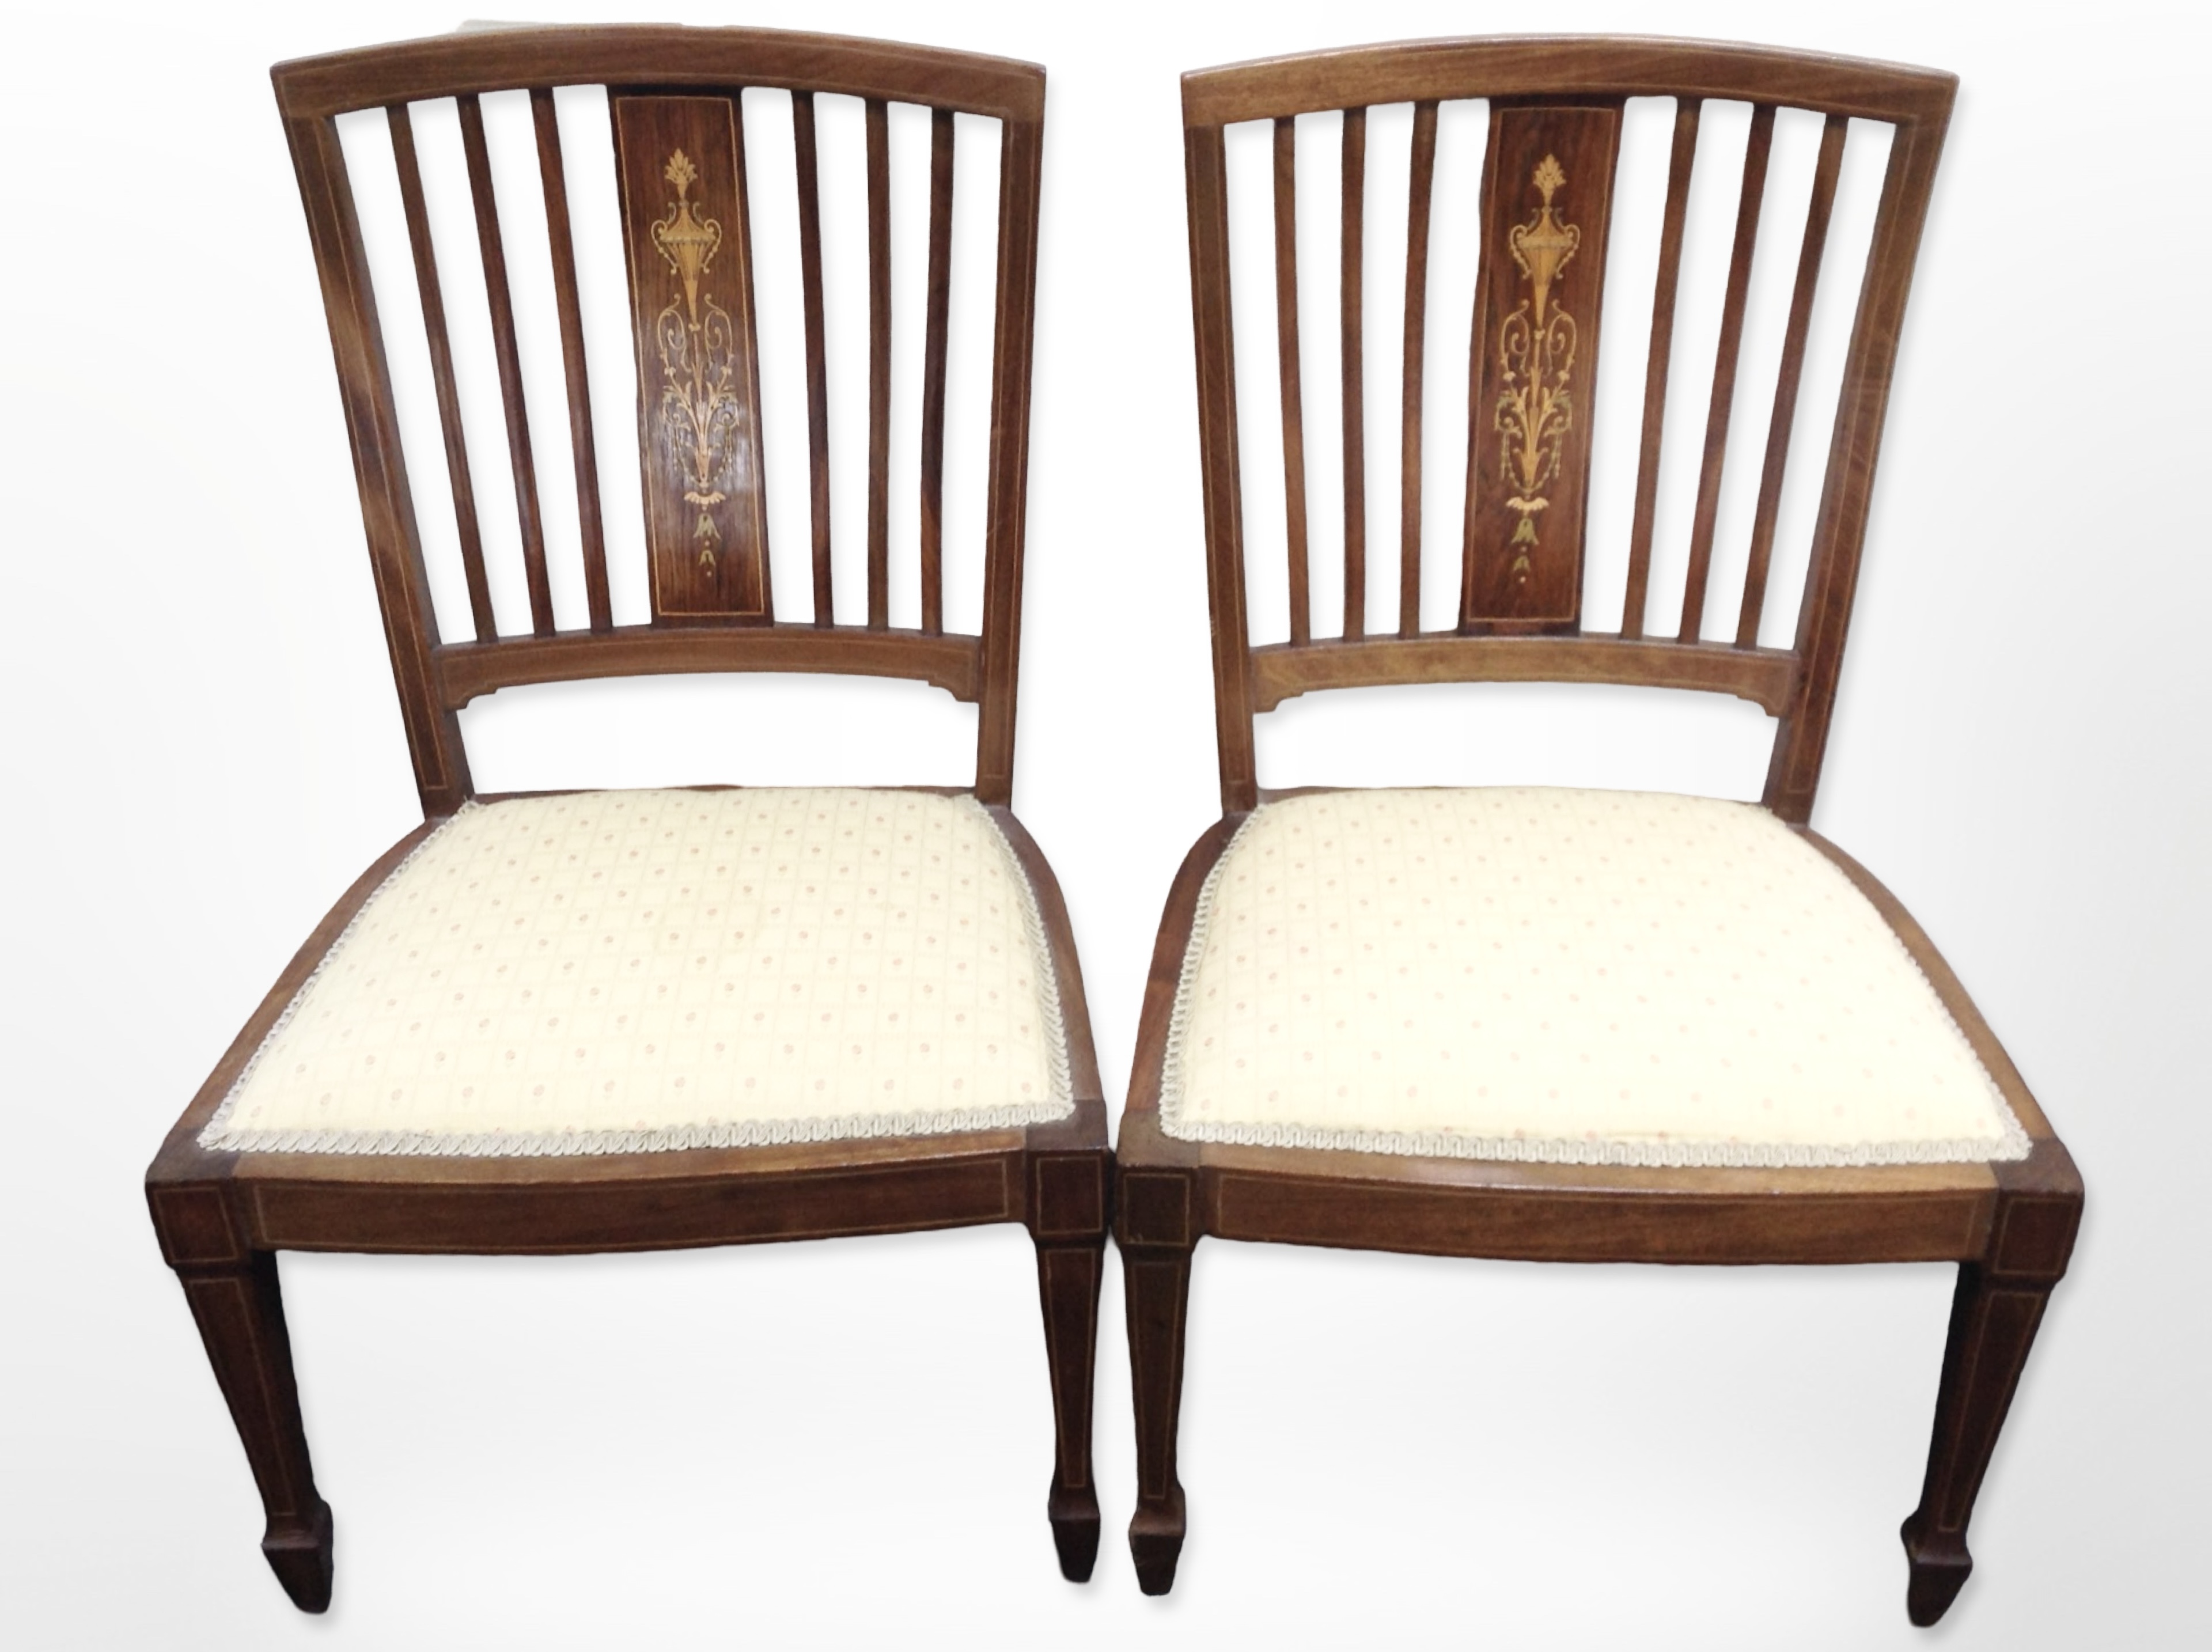 A pair of Edwardian mahogany and satinwood marquetry inlaid occasional chairs